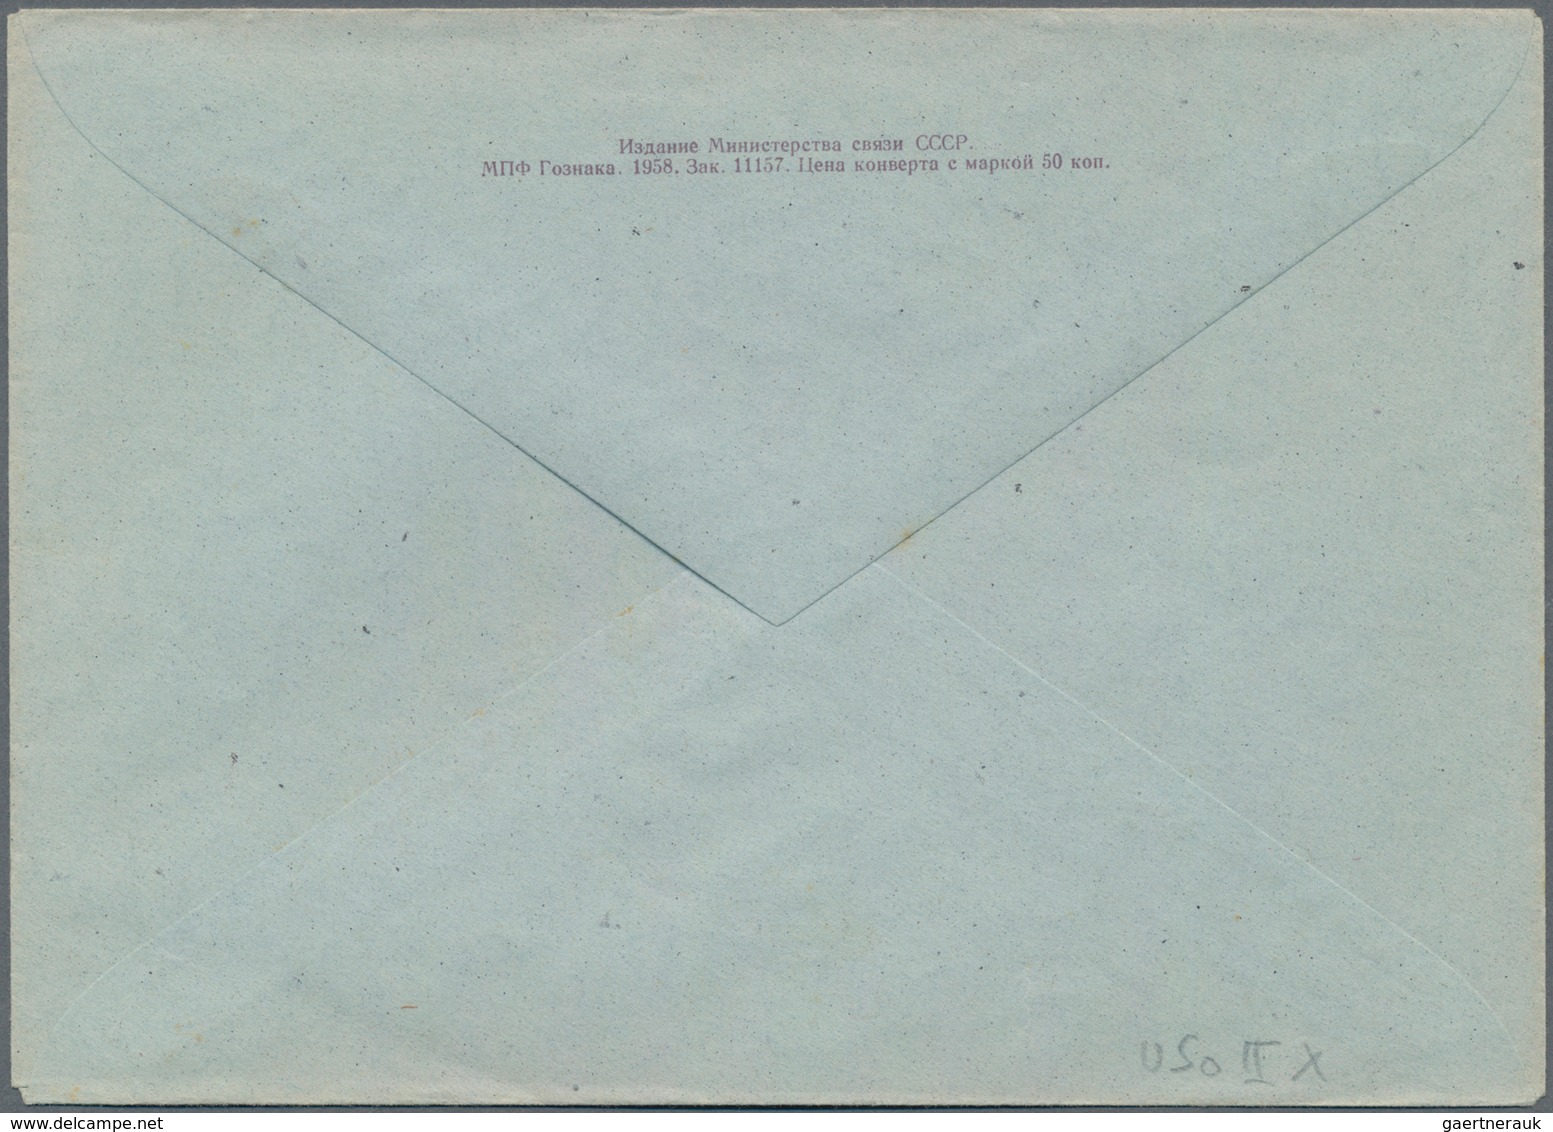 Sowjetunion - Ganzsachen: 1958 Unused Picture Envelope With Special Value Stamp USo 2IX On The Occas - Ohne Zuordnung